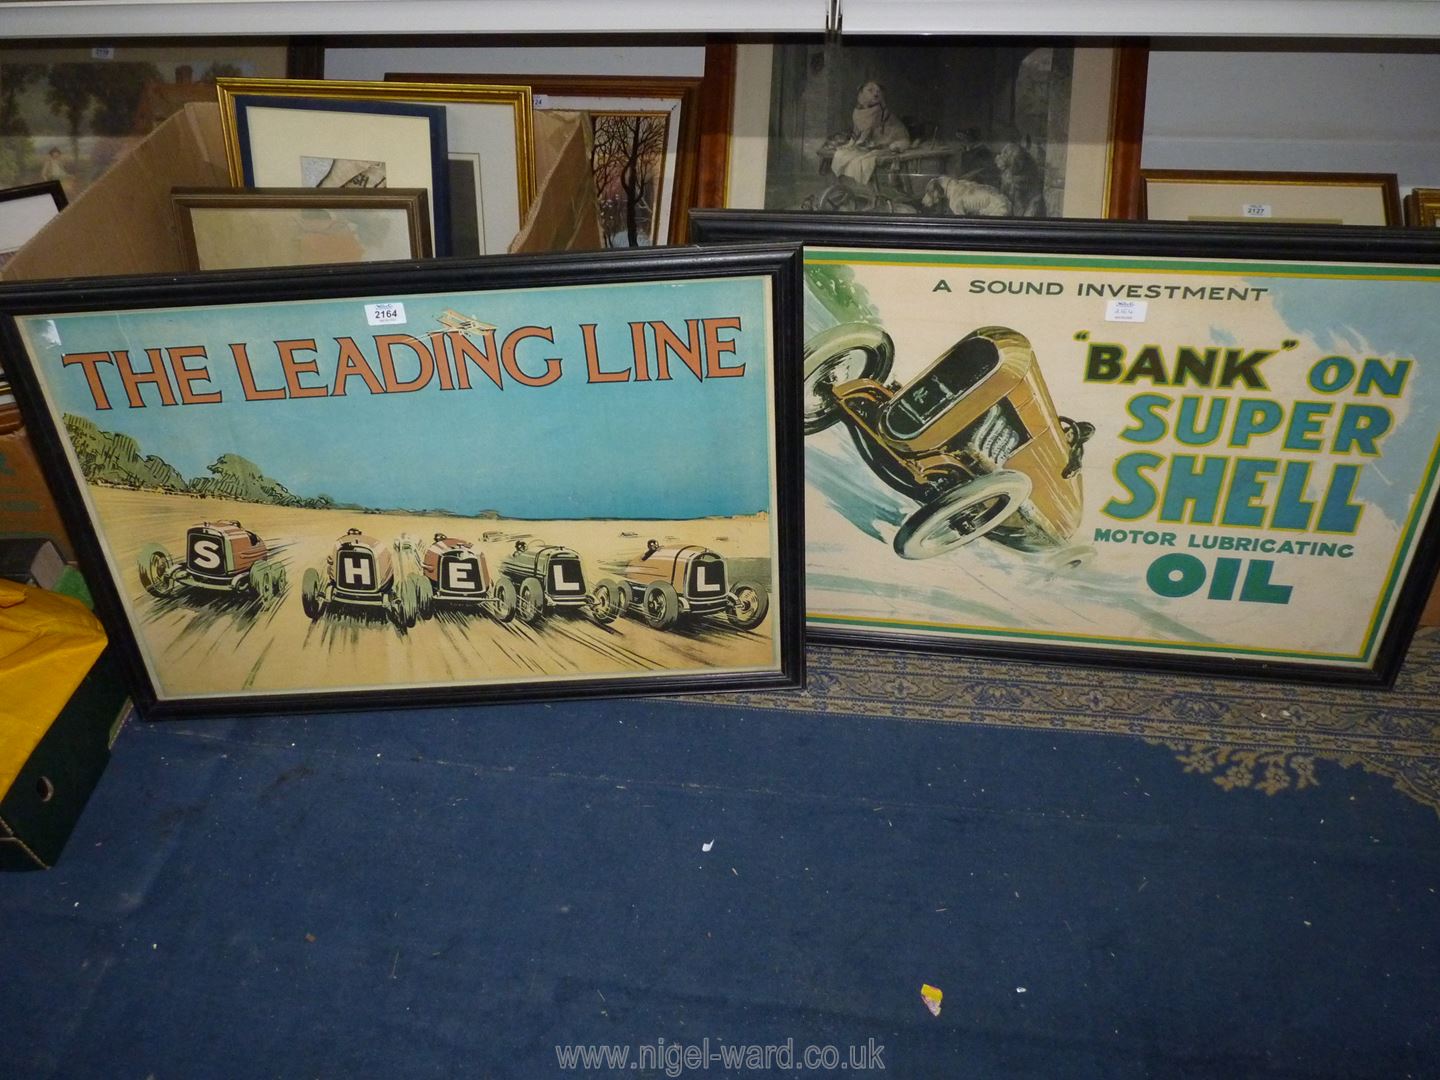 Two framed shell advertising posters 'Bank on Supershell' and 'The leading line' 32" x 22" incl.